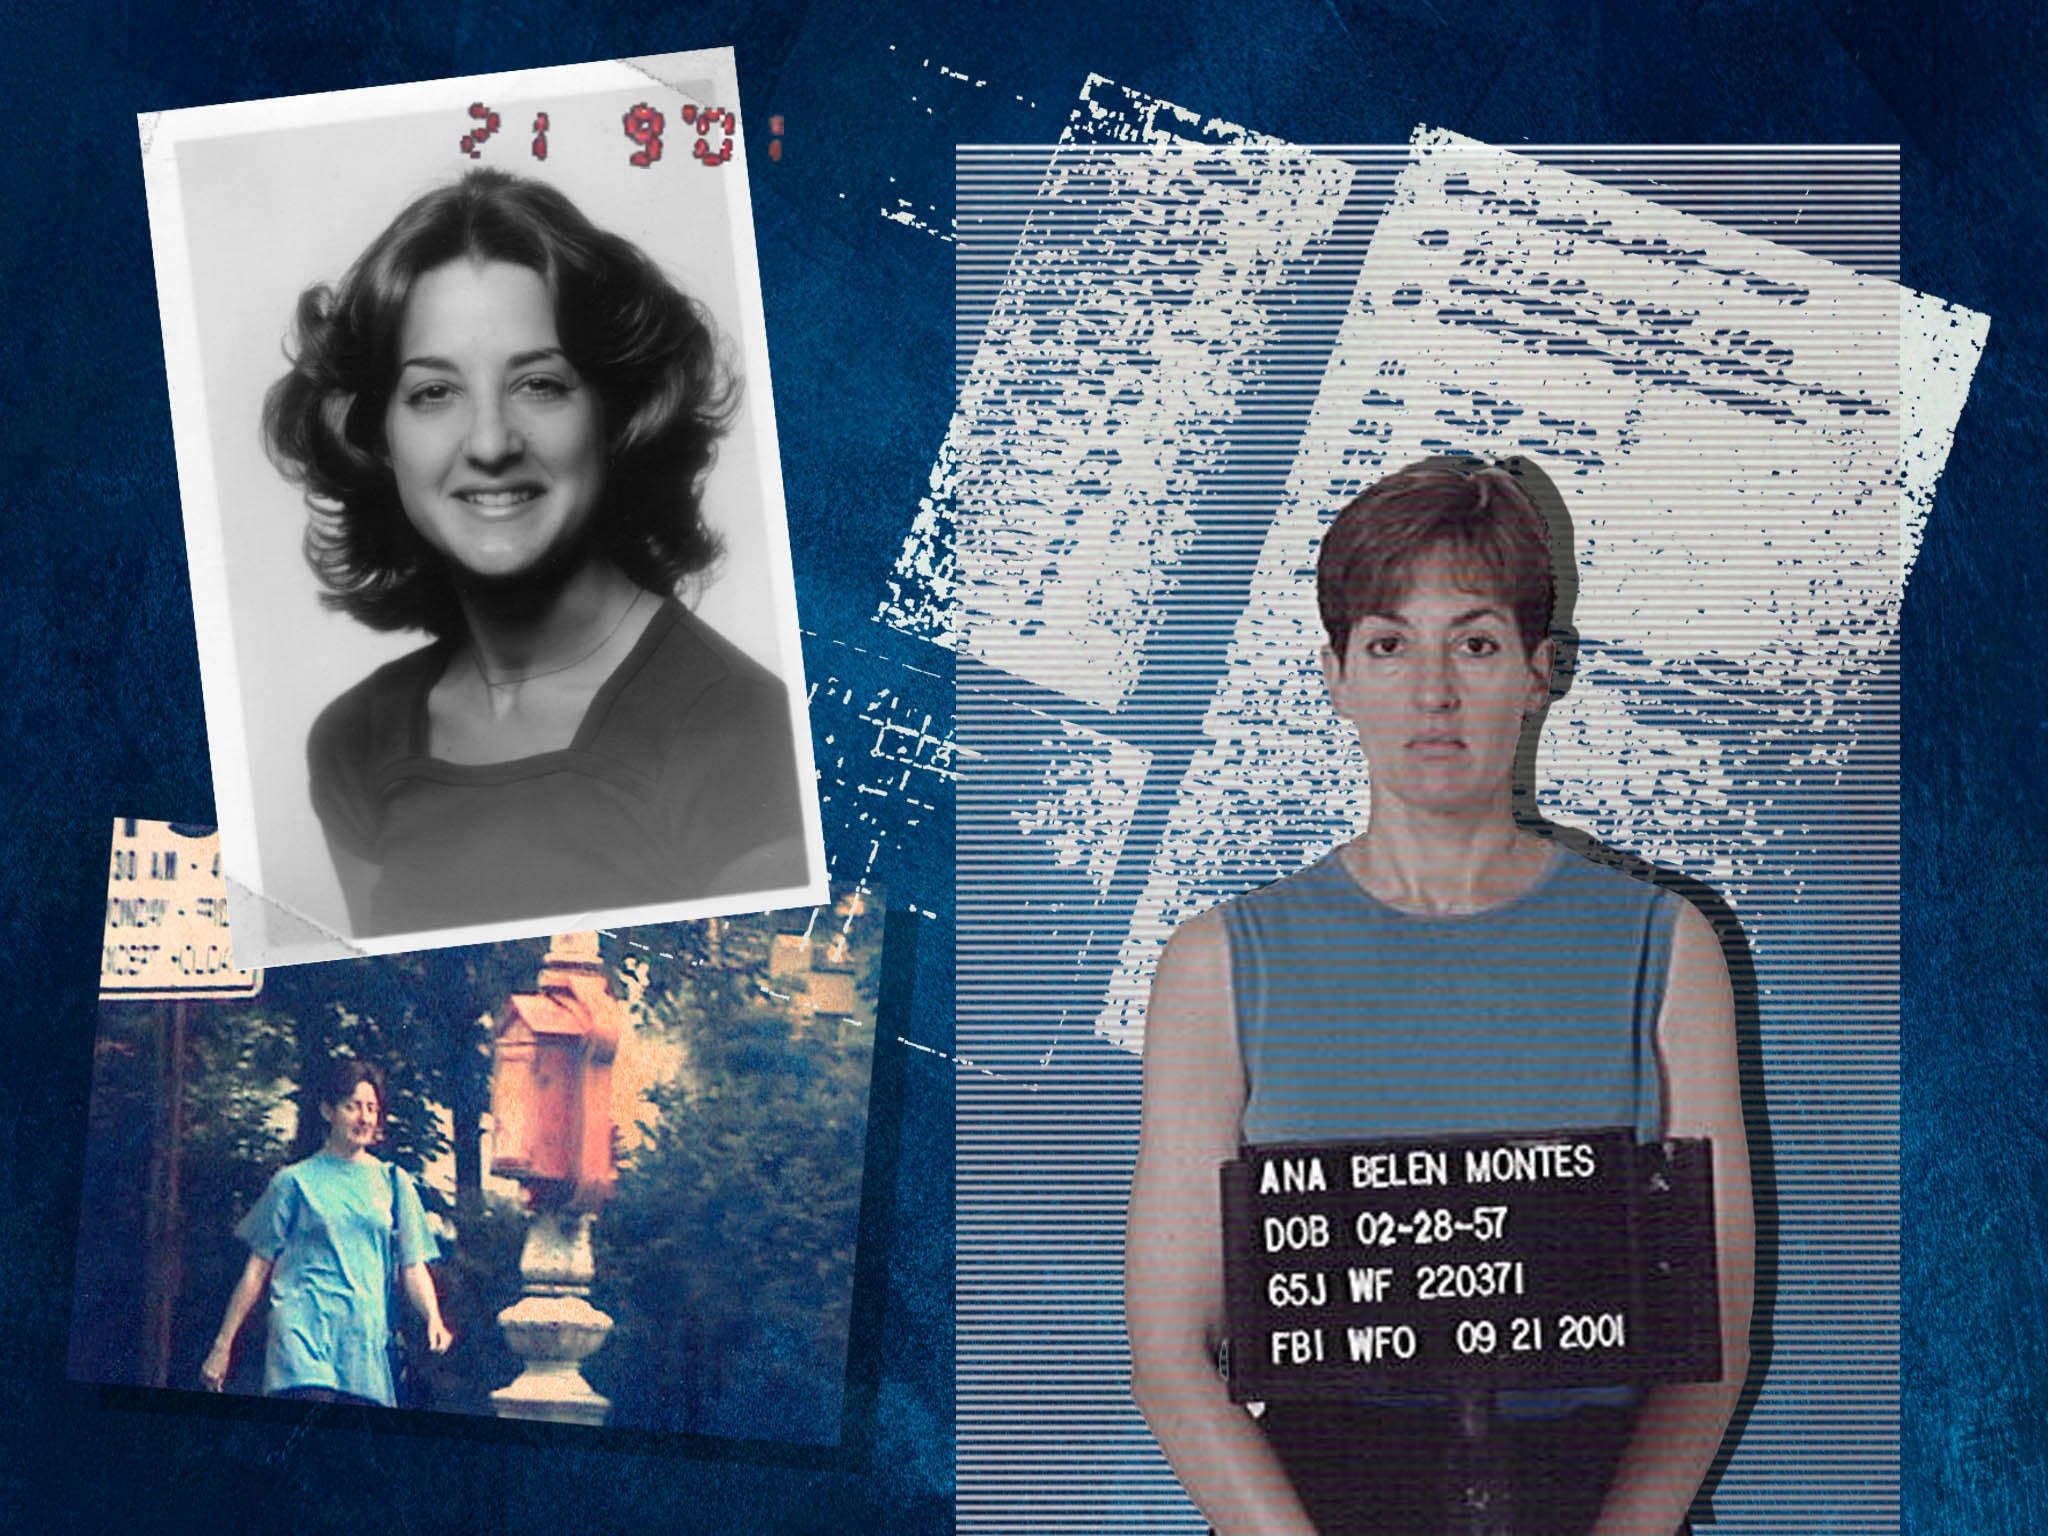 She spied for Cuba for years from inside the US government